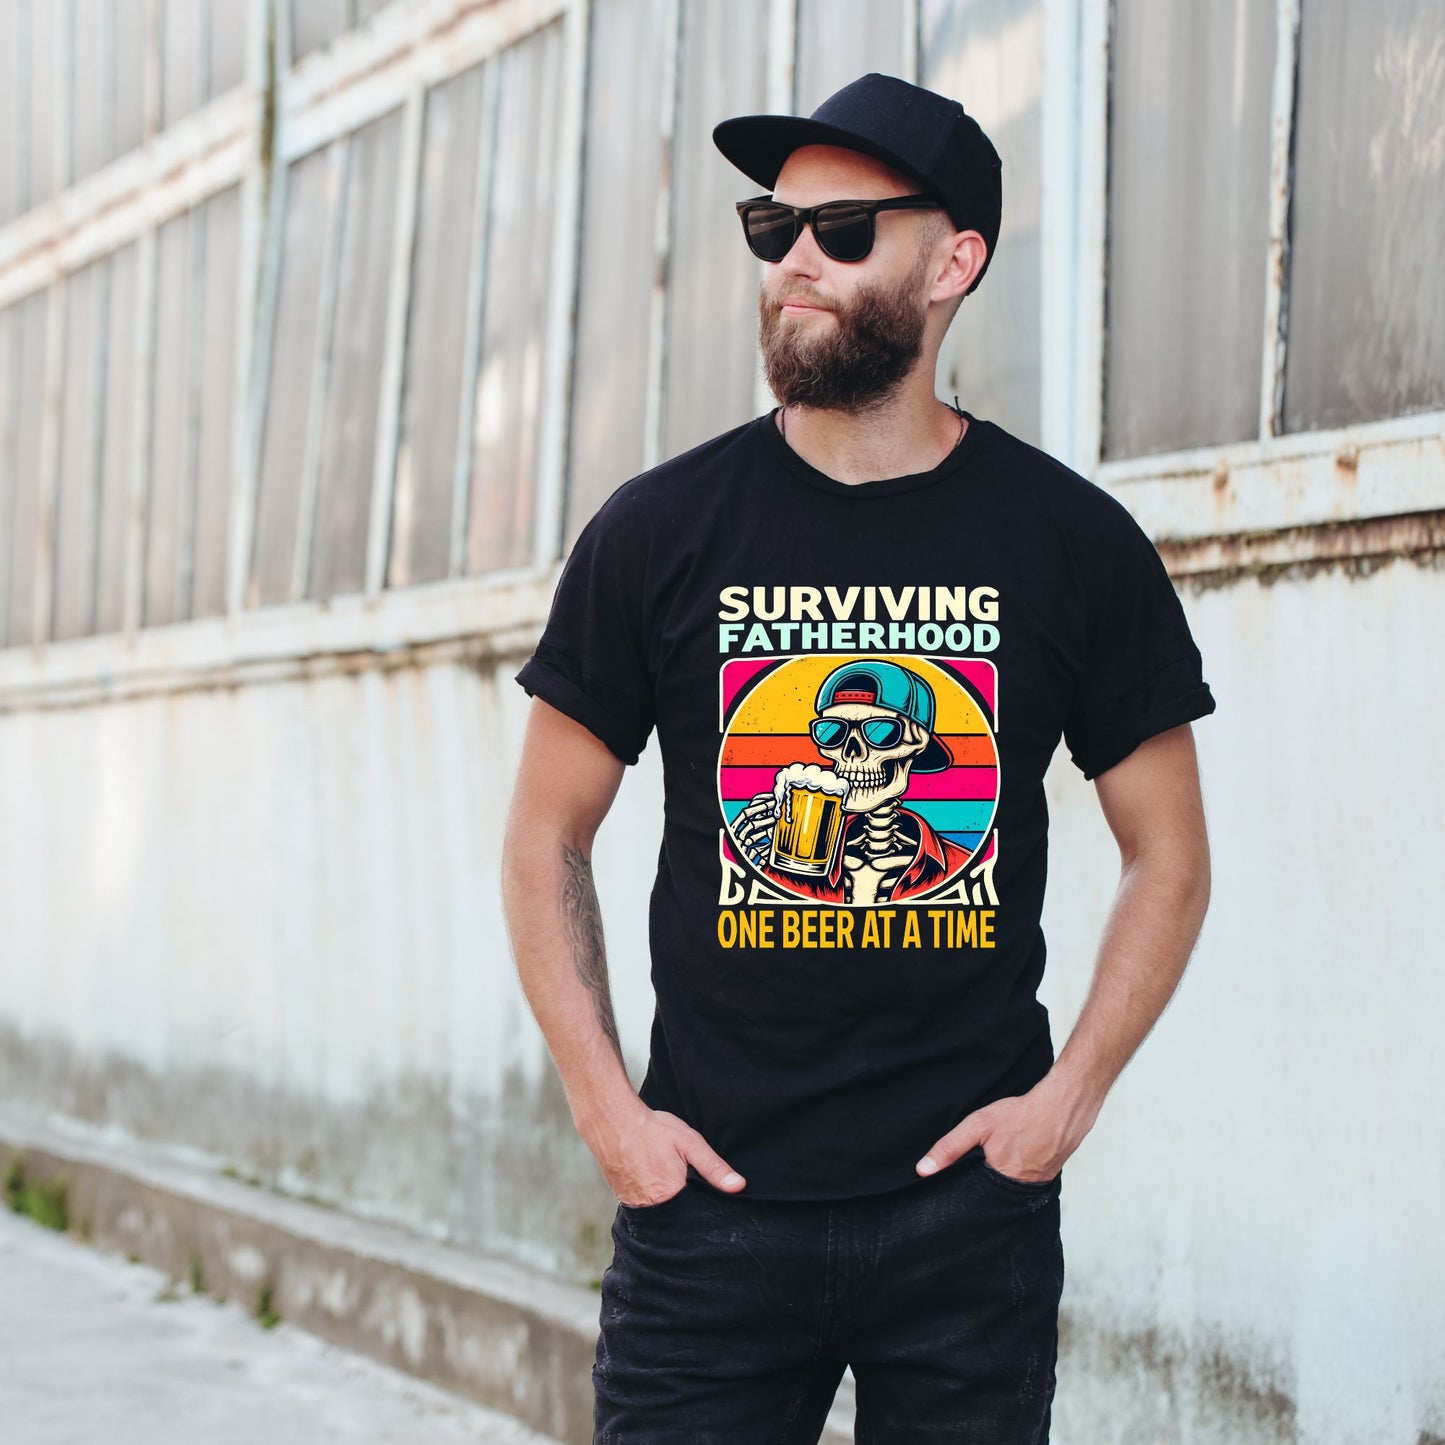 "Surviving Fatherhood One Beer at a Time" - Funny Dad T-Shirt